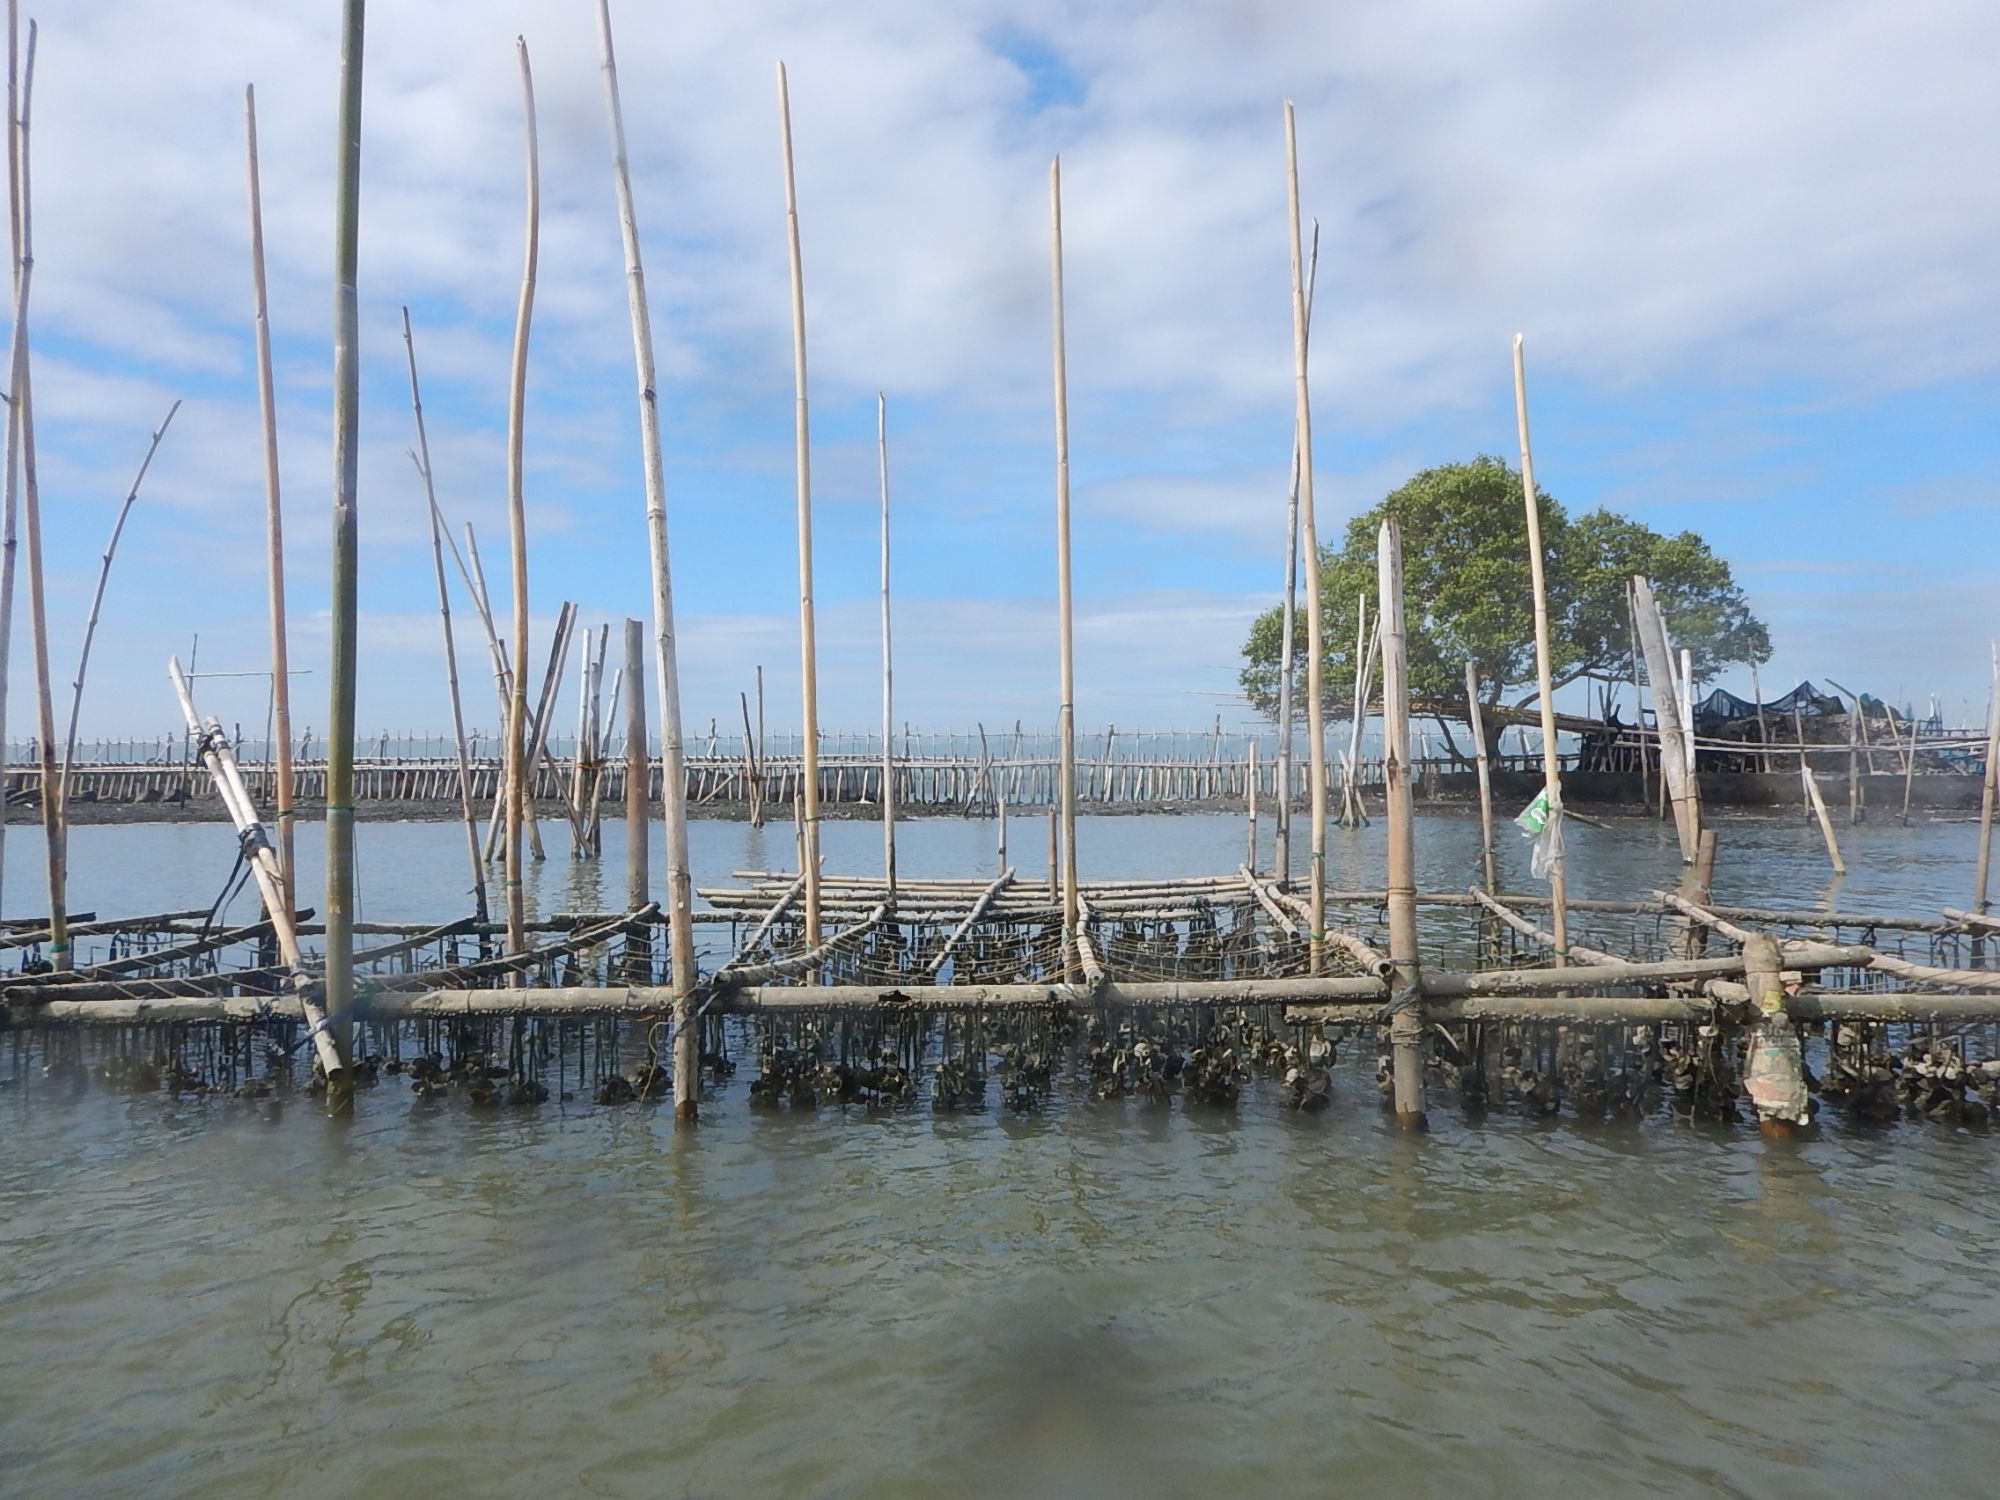 An oyster farm in Paombong, Bulacan, Philippines.